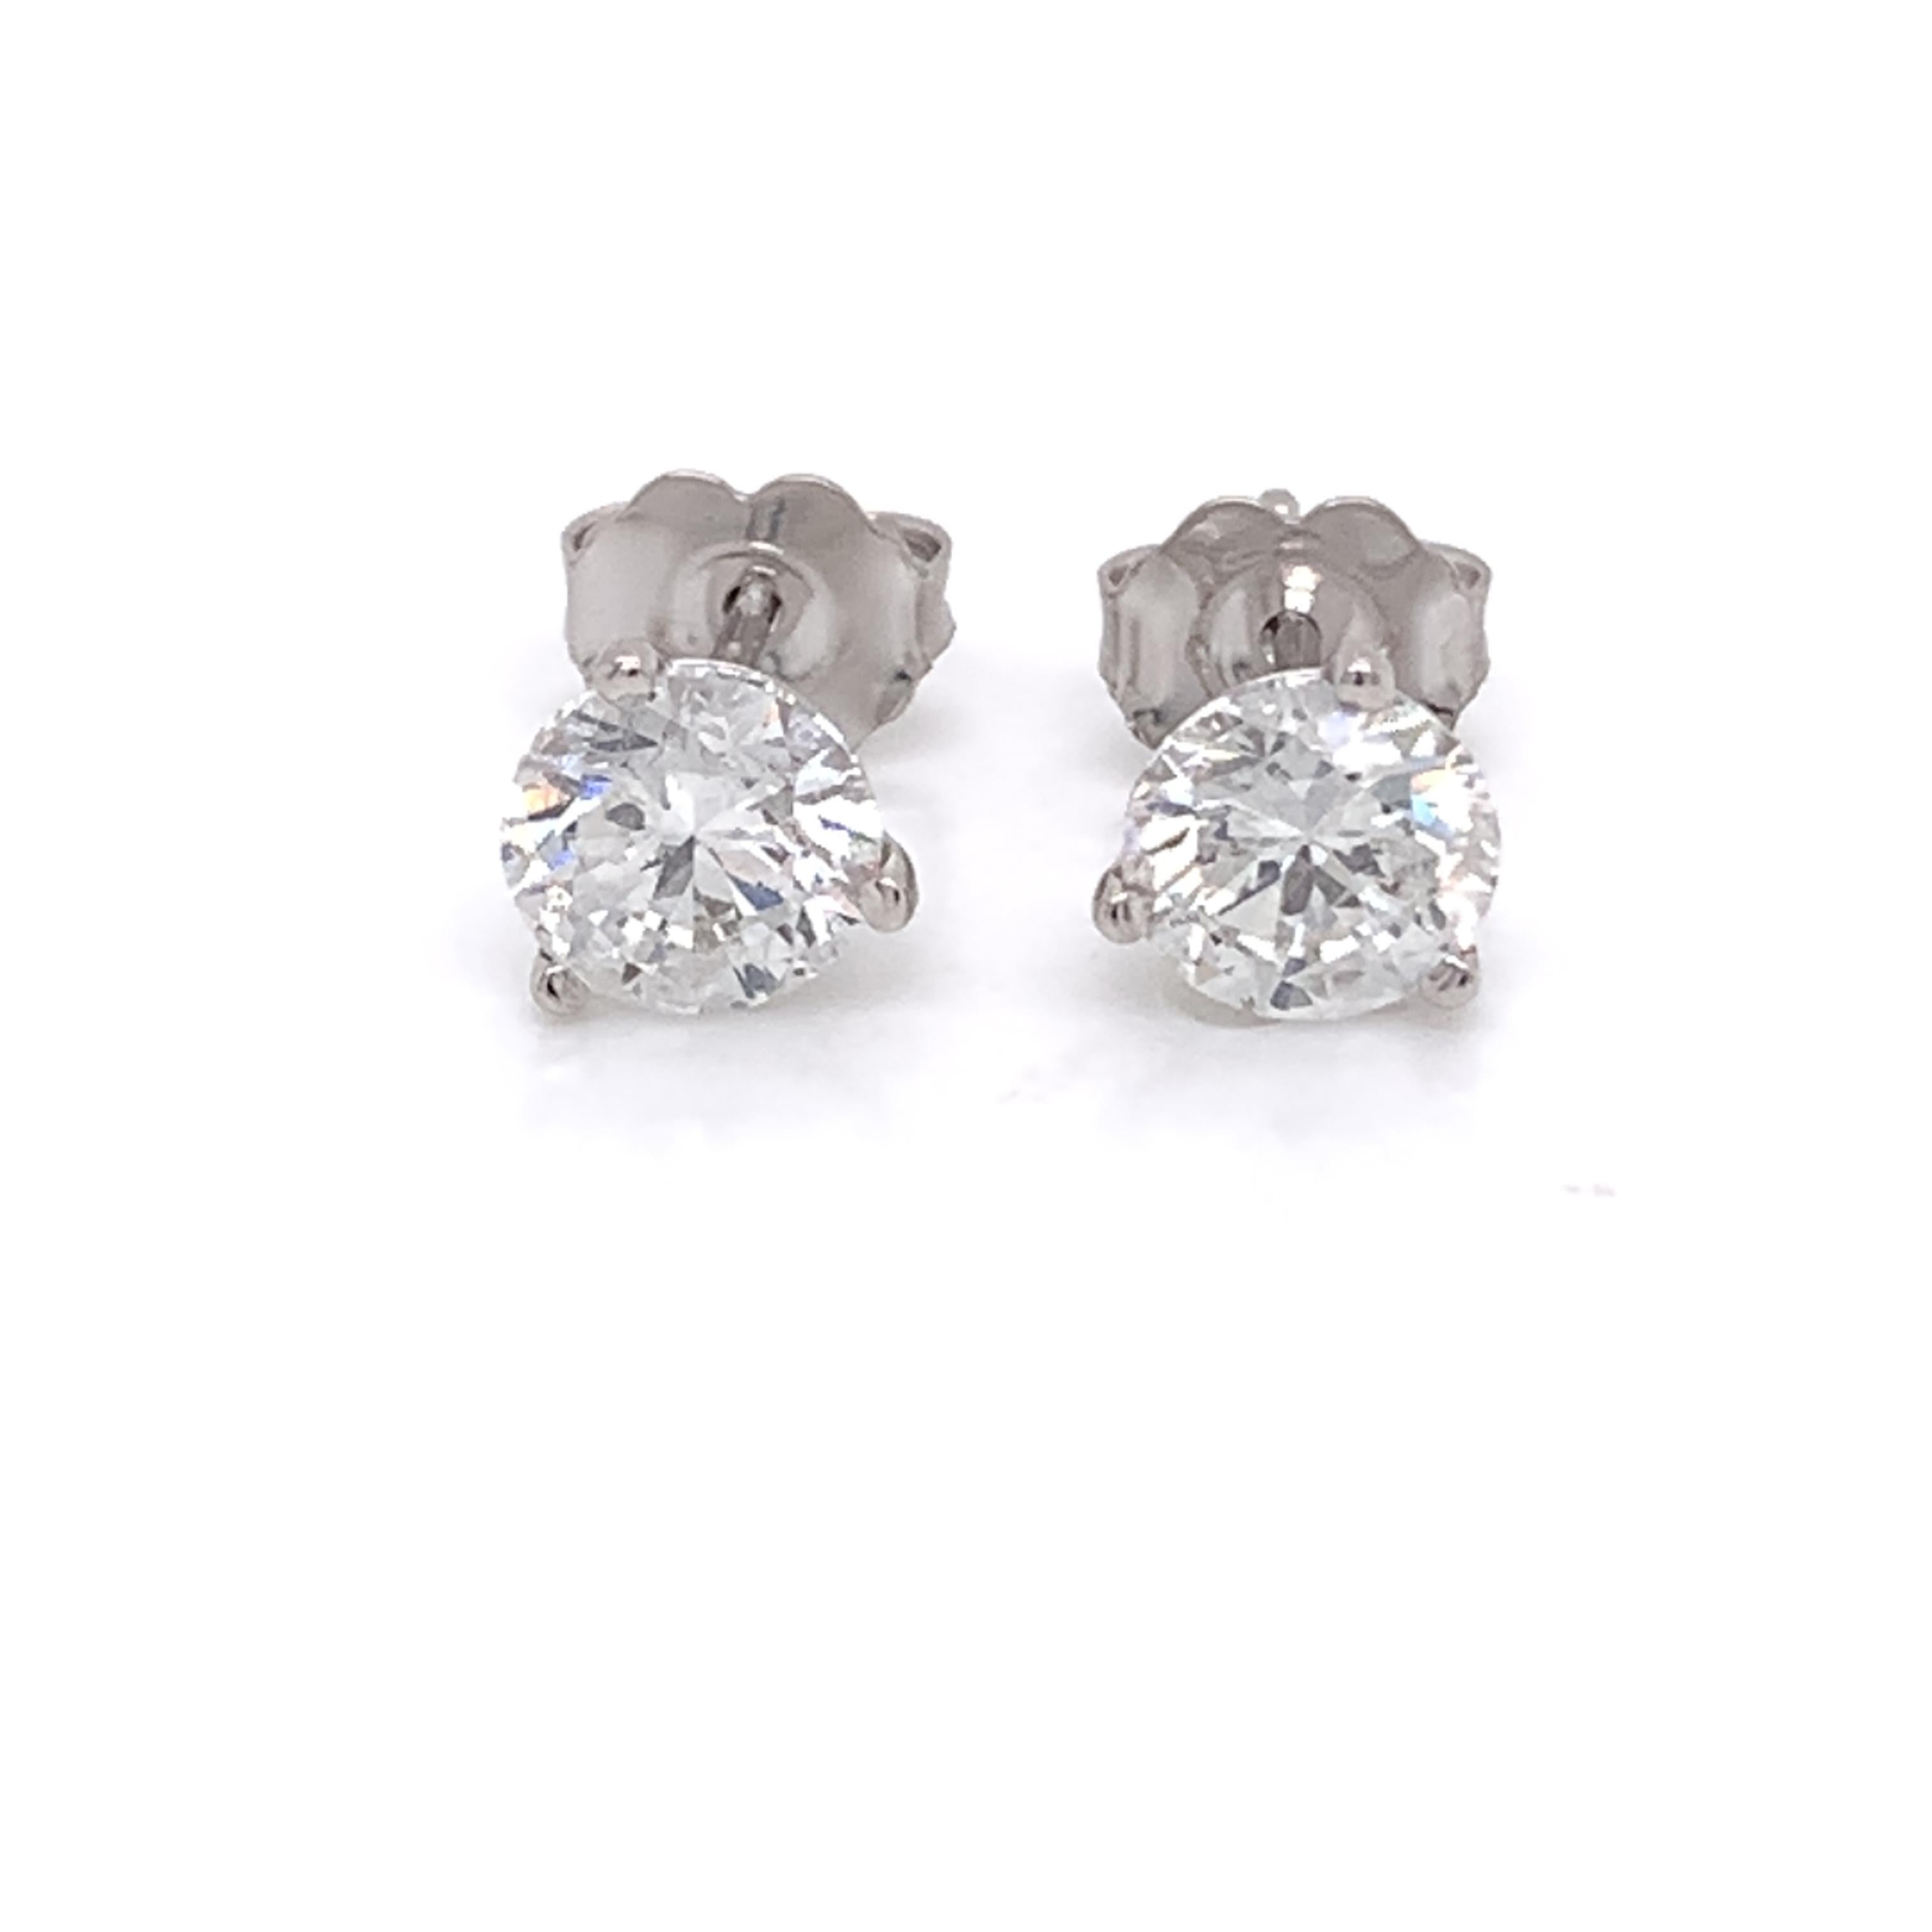 Diamond stud earrings made with real/natural brilliant cut diamonds. Total Diamond Weight: 1.57 carats. Diamond Quantity: 2 round diamonds. Color: F-G. Clarity: SI2-SI3. Mounted on 18kt white gold push-back setting.